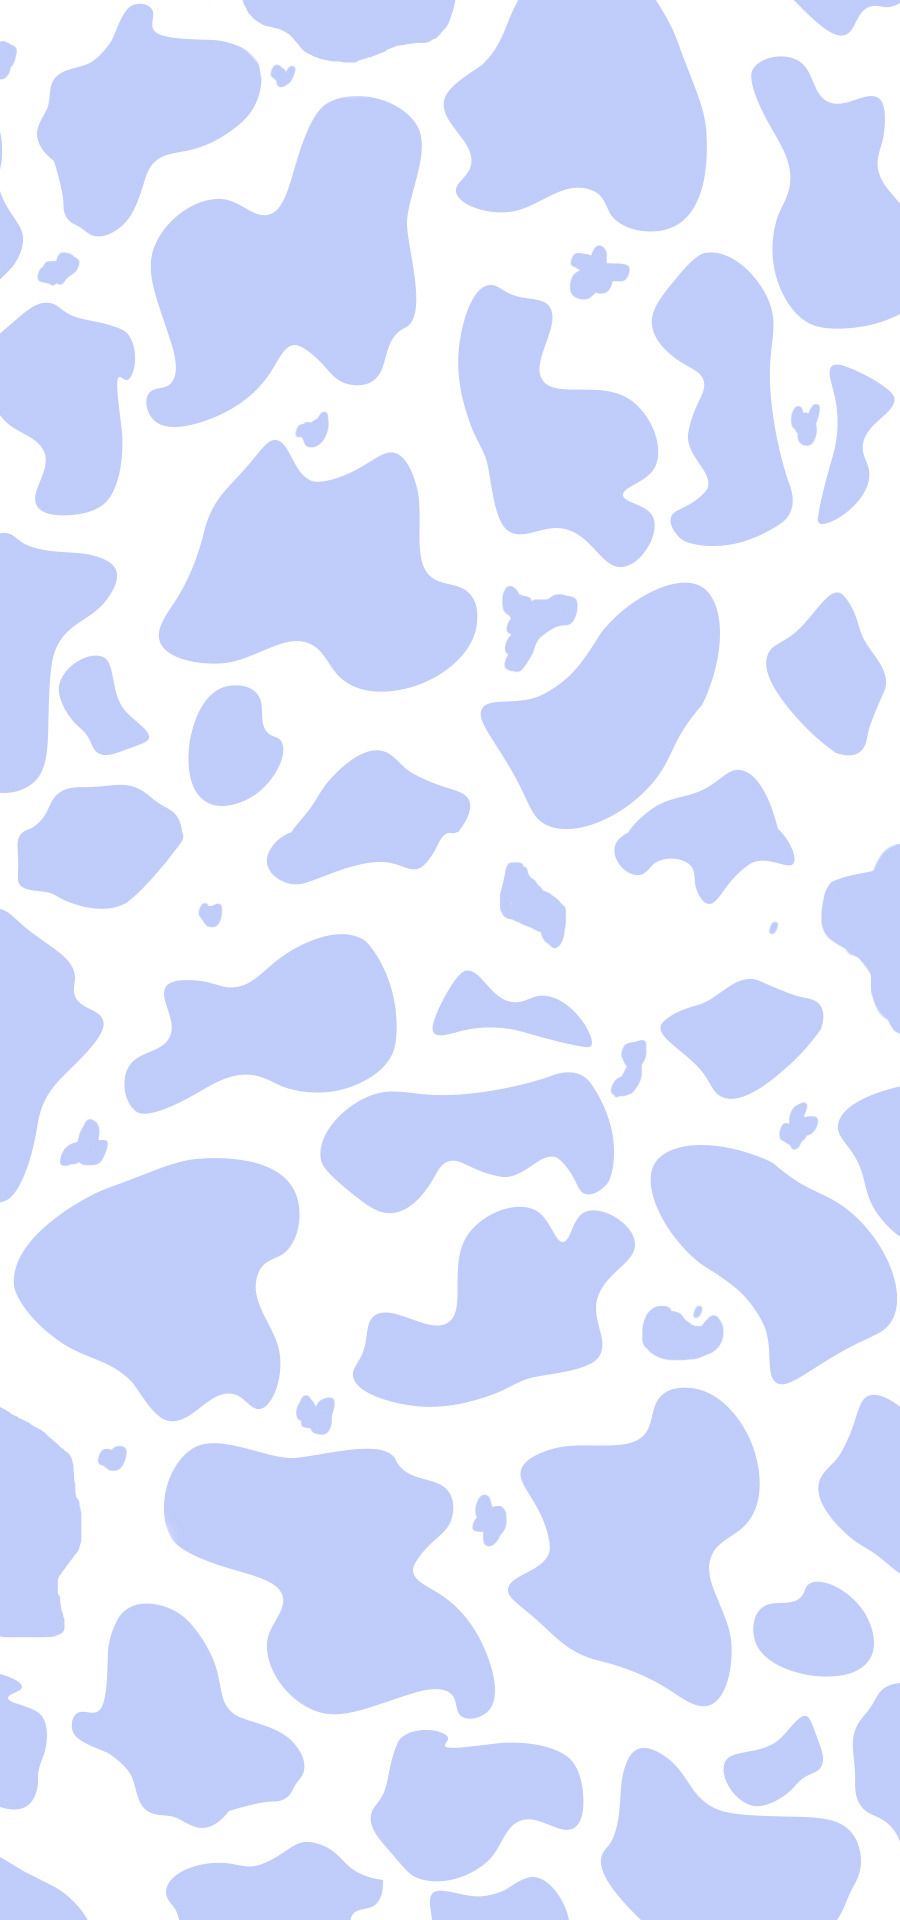 Aesthetic Cow Print Wallpaper, Buy Now, Flash Sales, 54% OFF